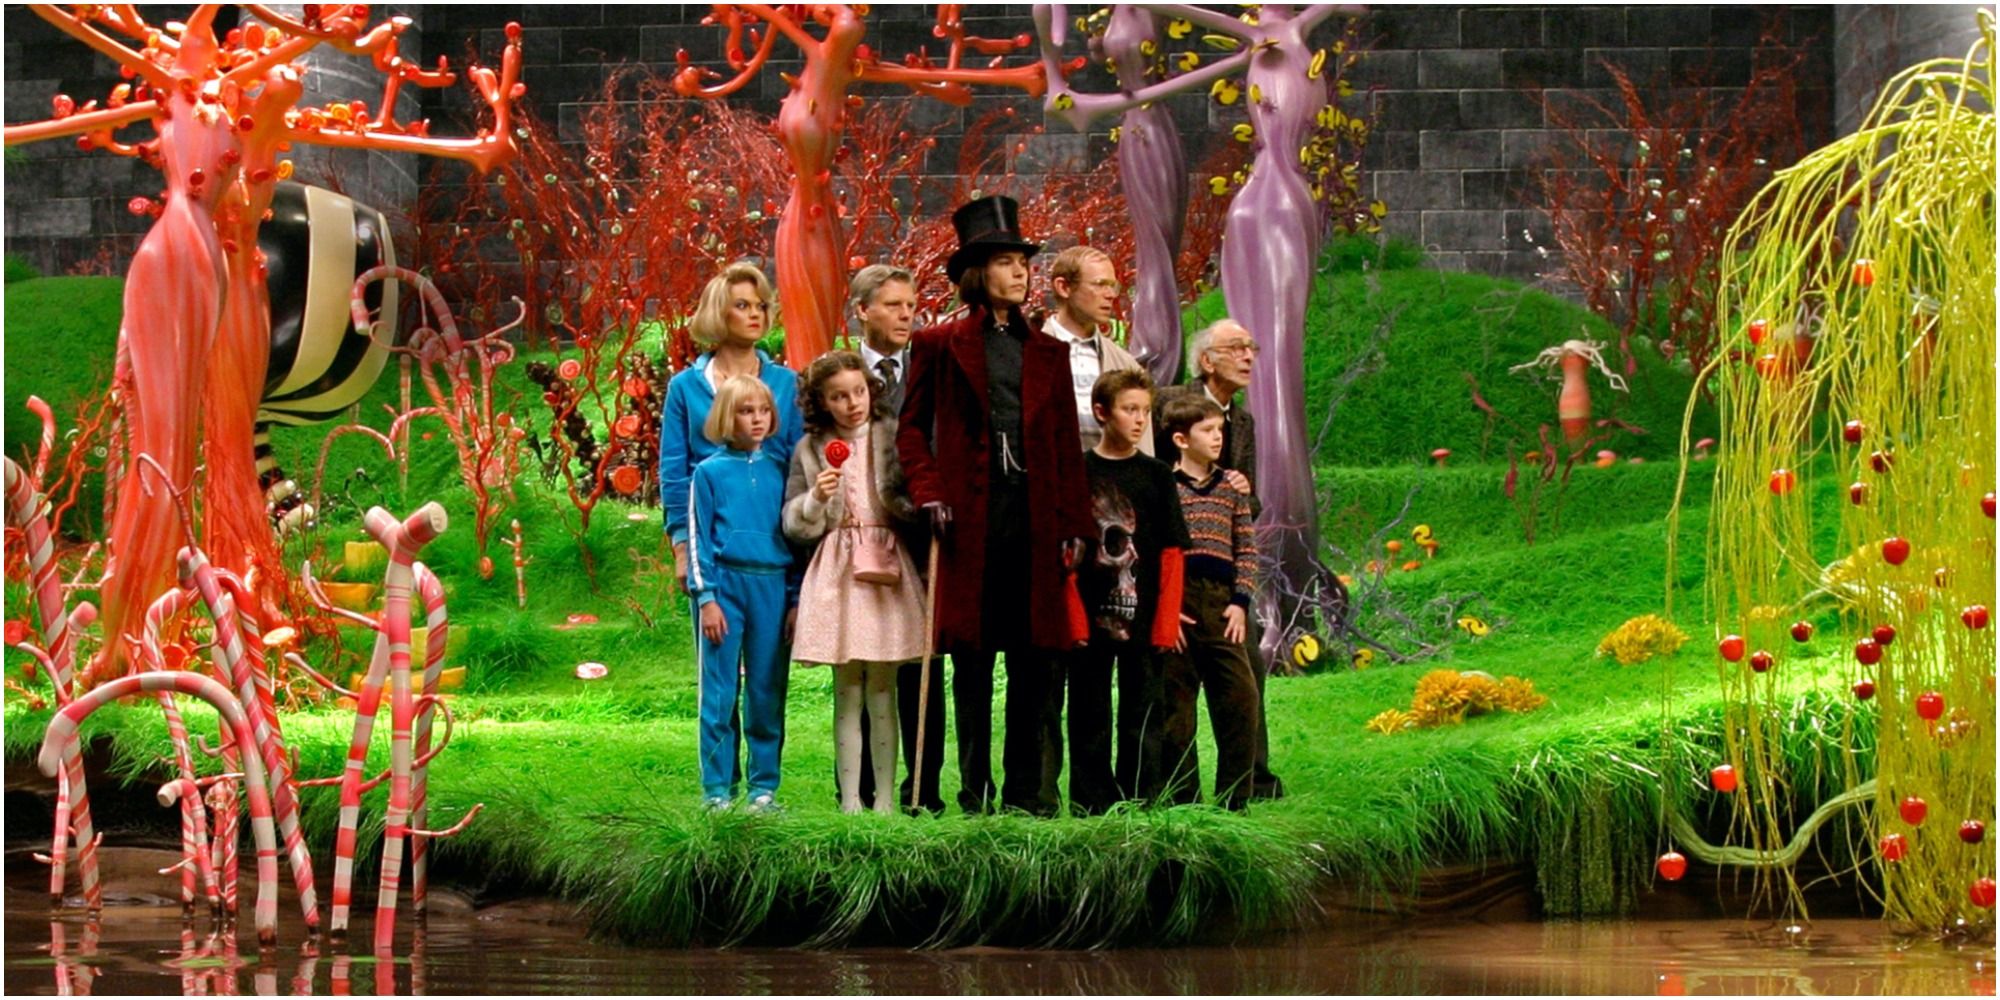 Willy Wonka 5 Reasons The 1971 Version Is The Best Adaptation (& 5 It’s Tim Burton’s Version)